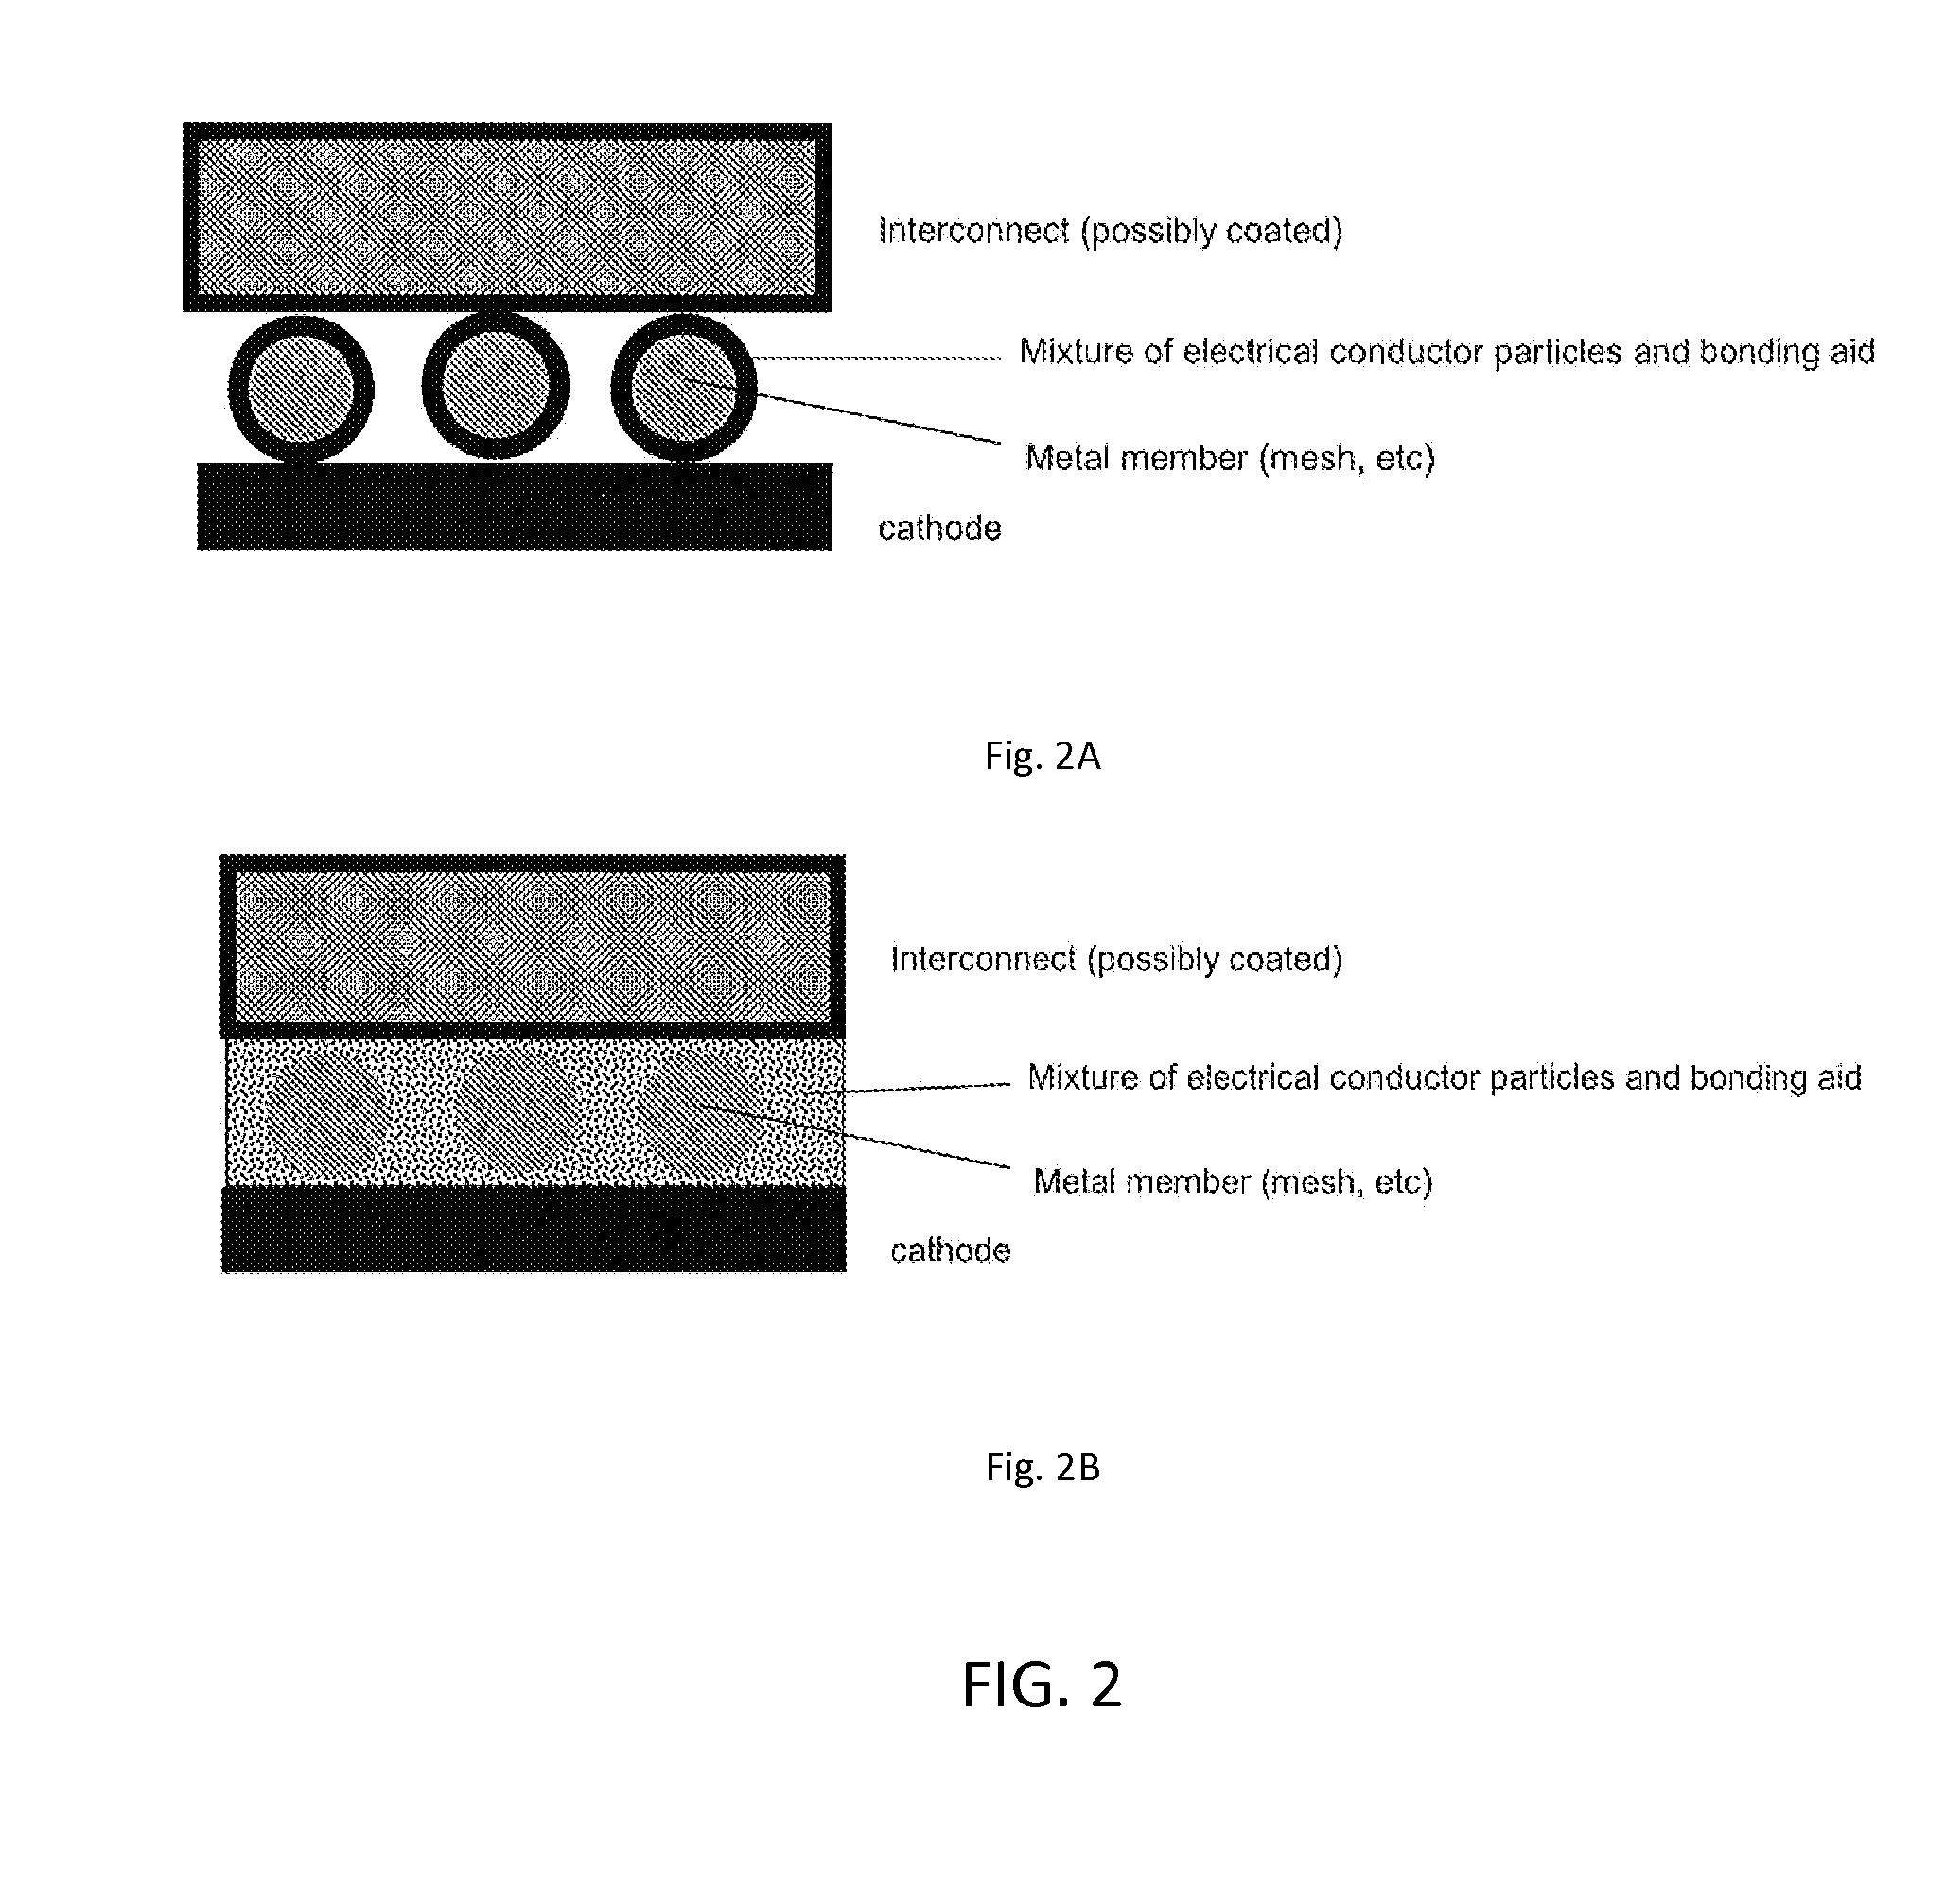 Electrical Contact Material in High-Temperature Electrochemical Devices